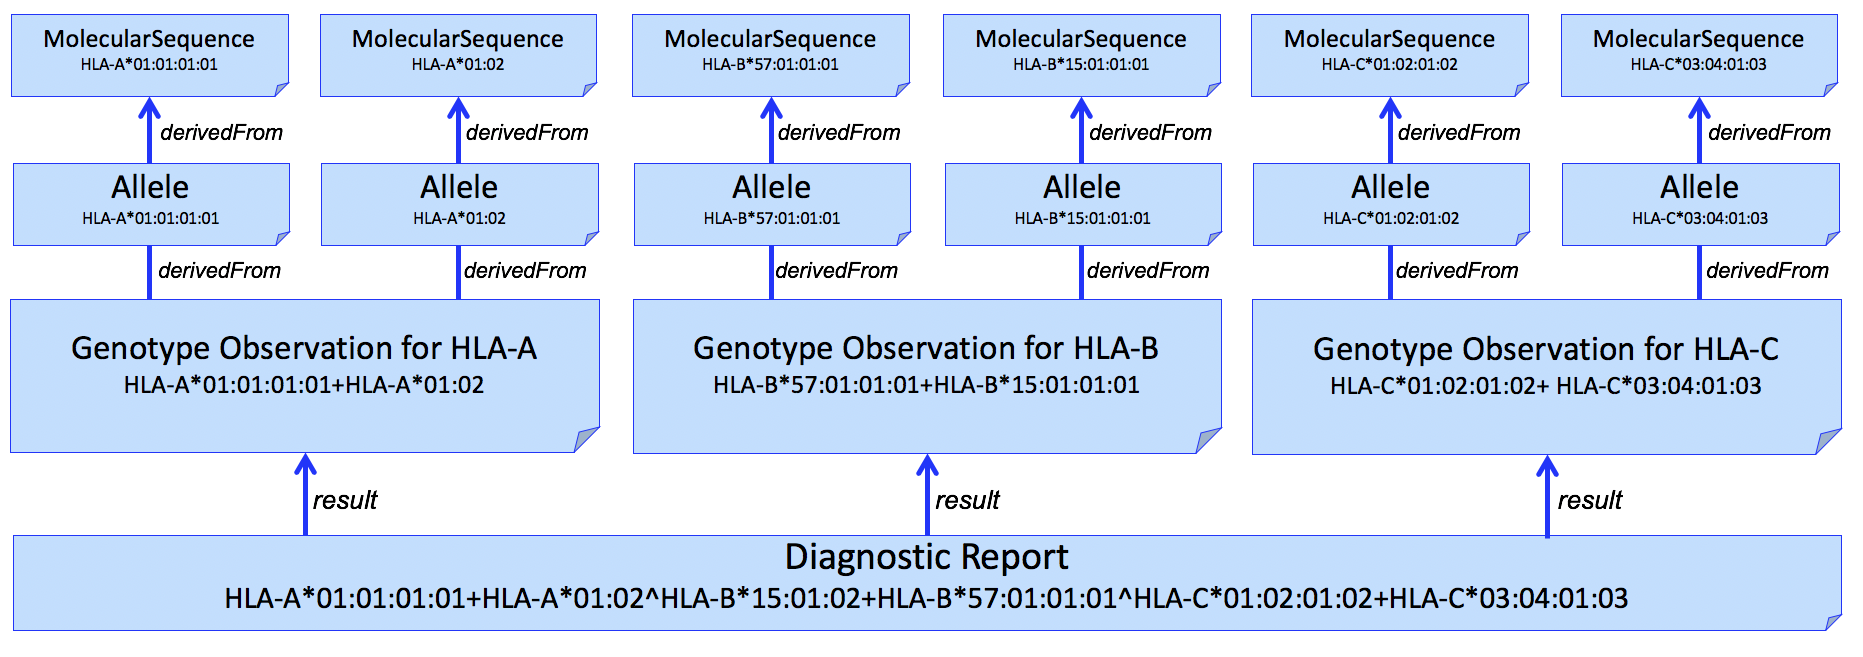 Genetic test report for HLA-A, -B, and -C genotyping, with molecular sequence data used to derive each genotype.